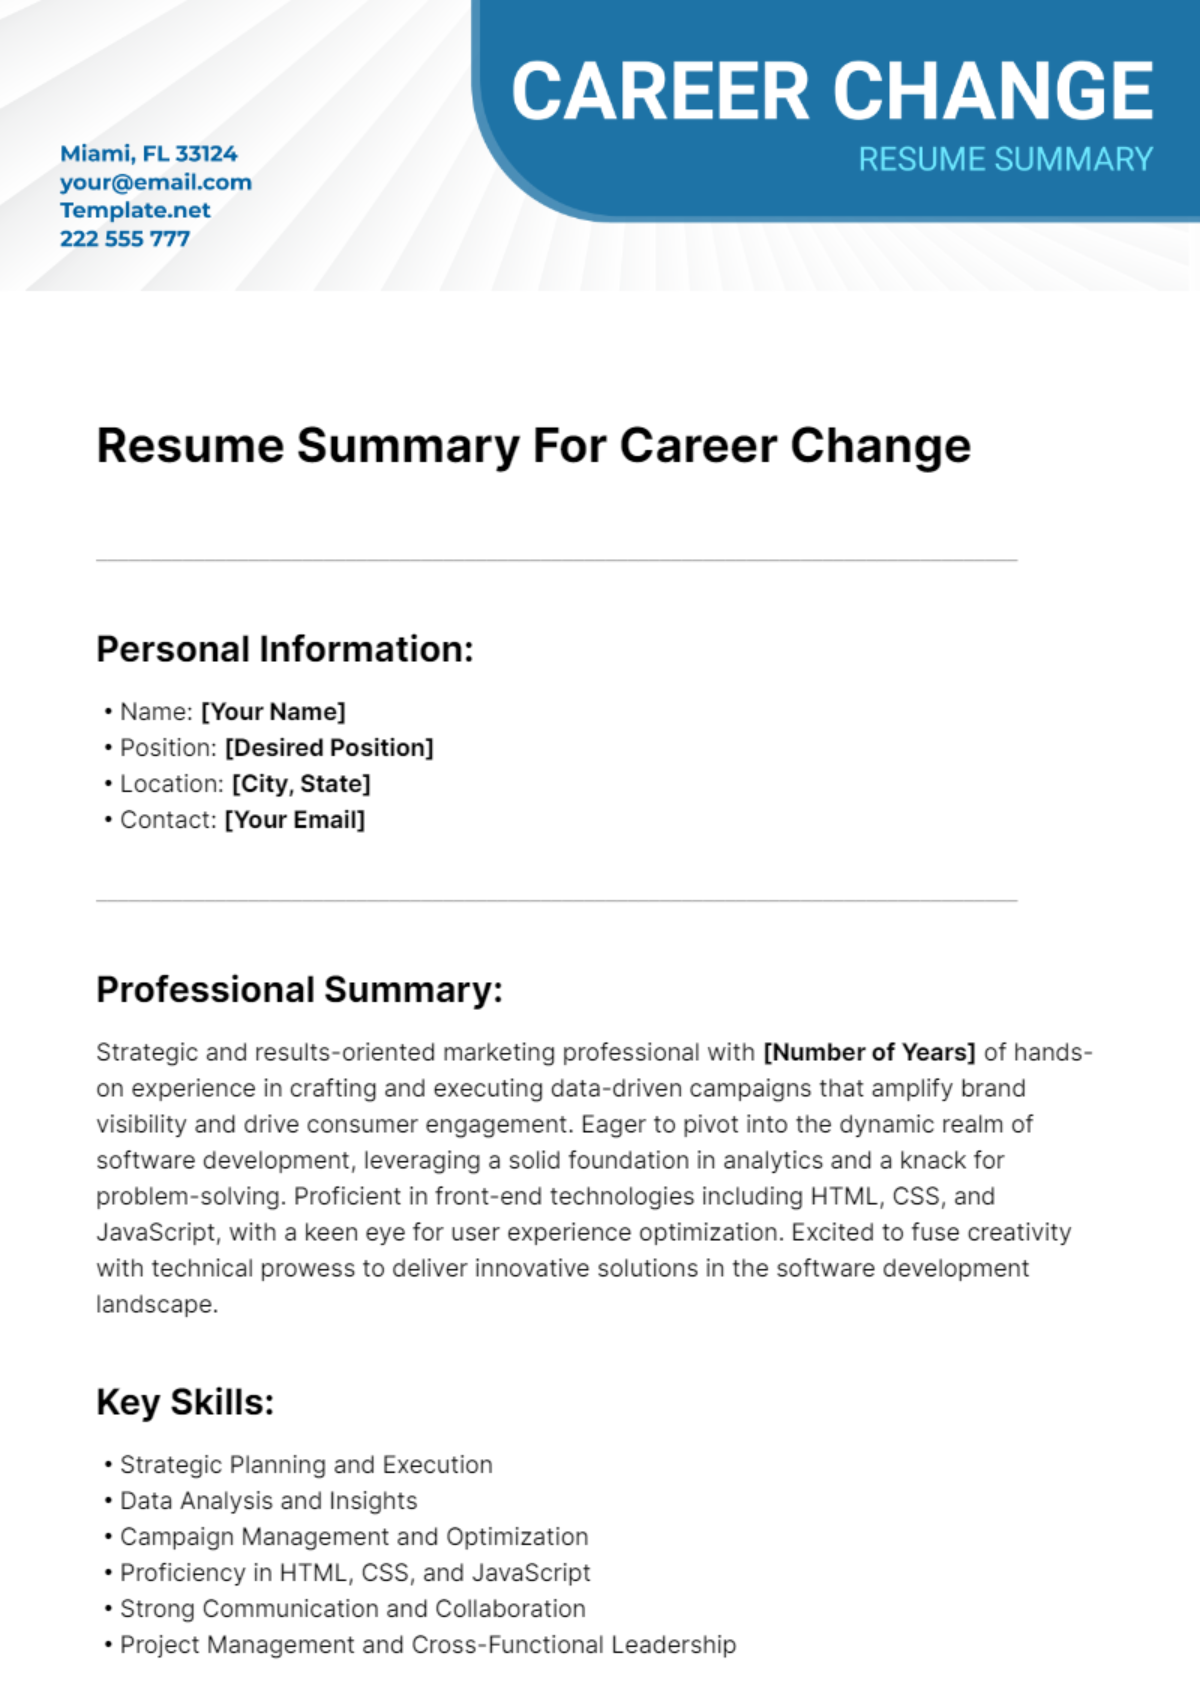 Free Resume Summary For Career Change Template